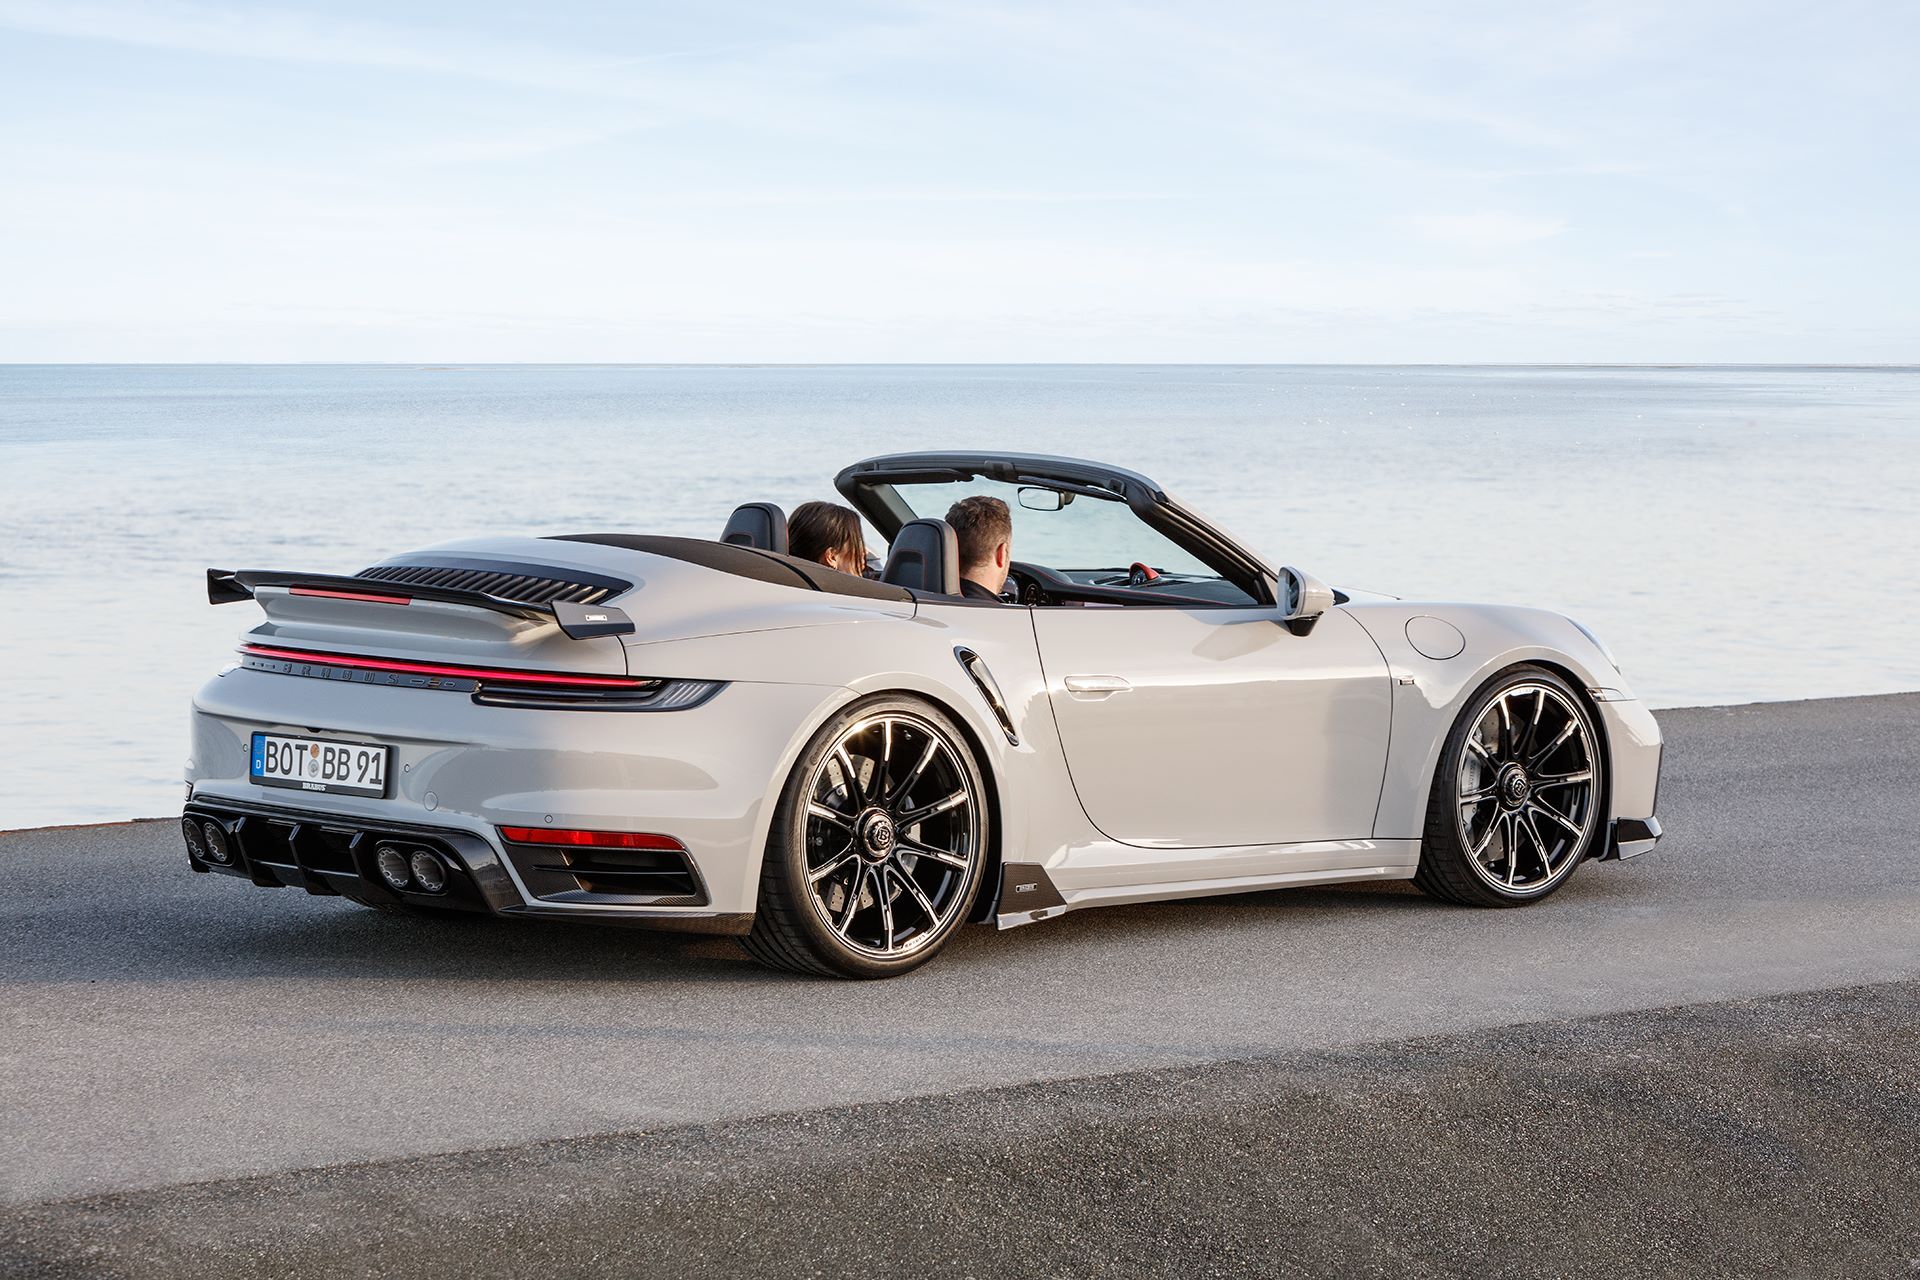 BRABUS-820-based-on-911-Turbo-S-Cabriolet-Outdoor-21